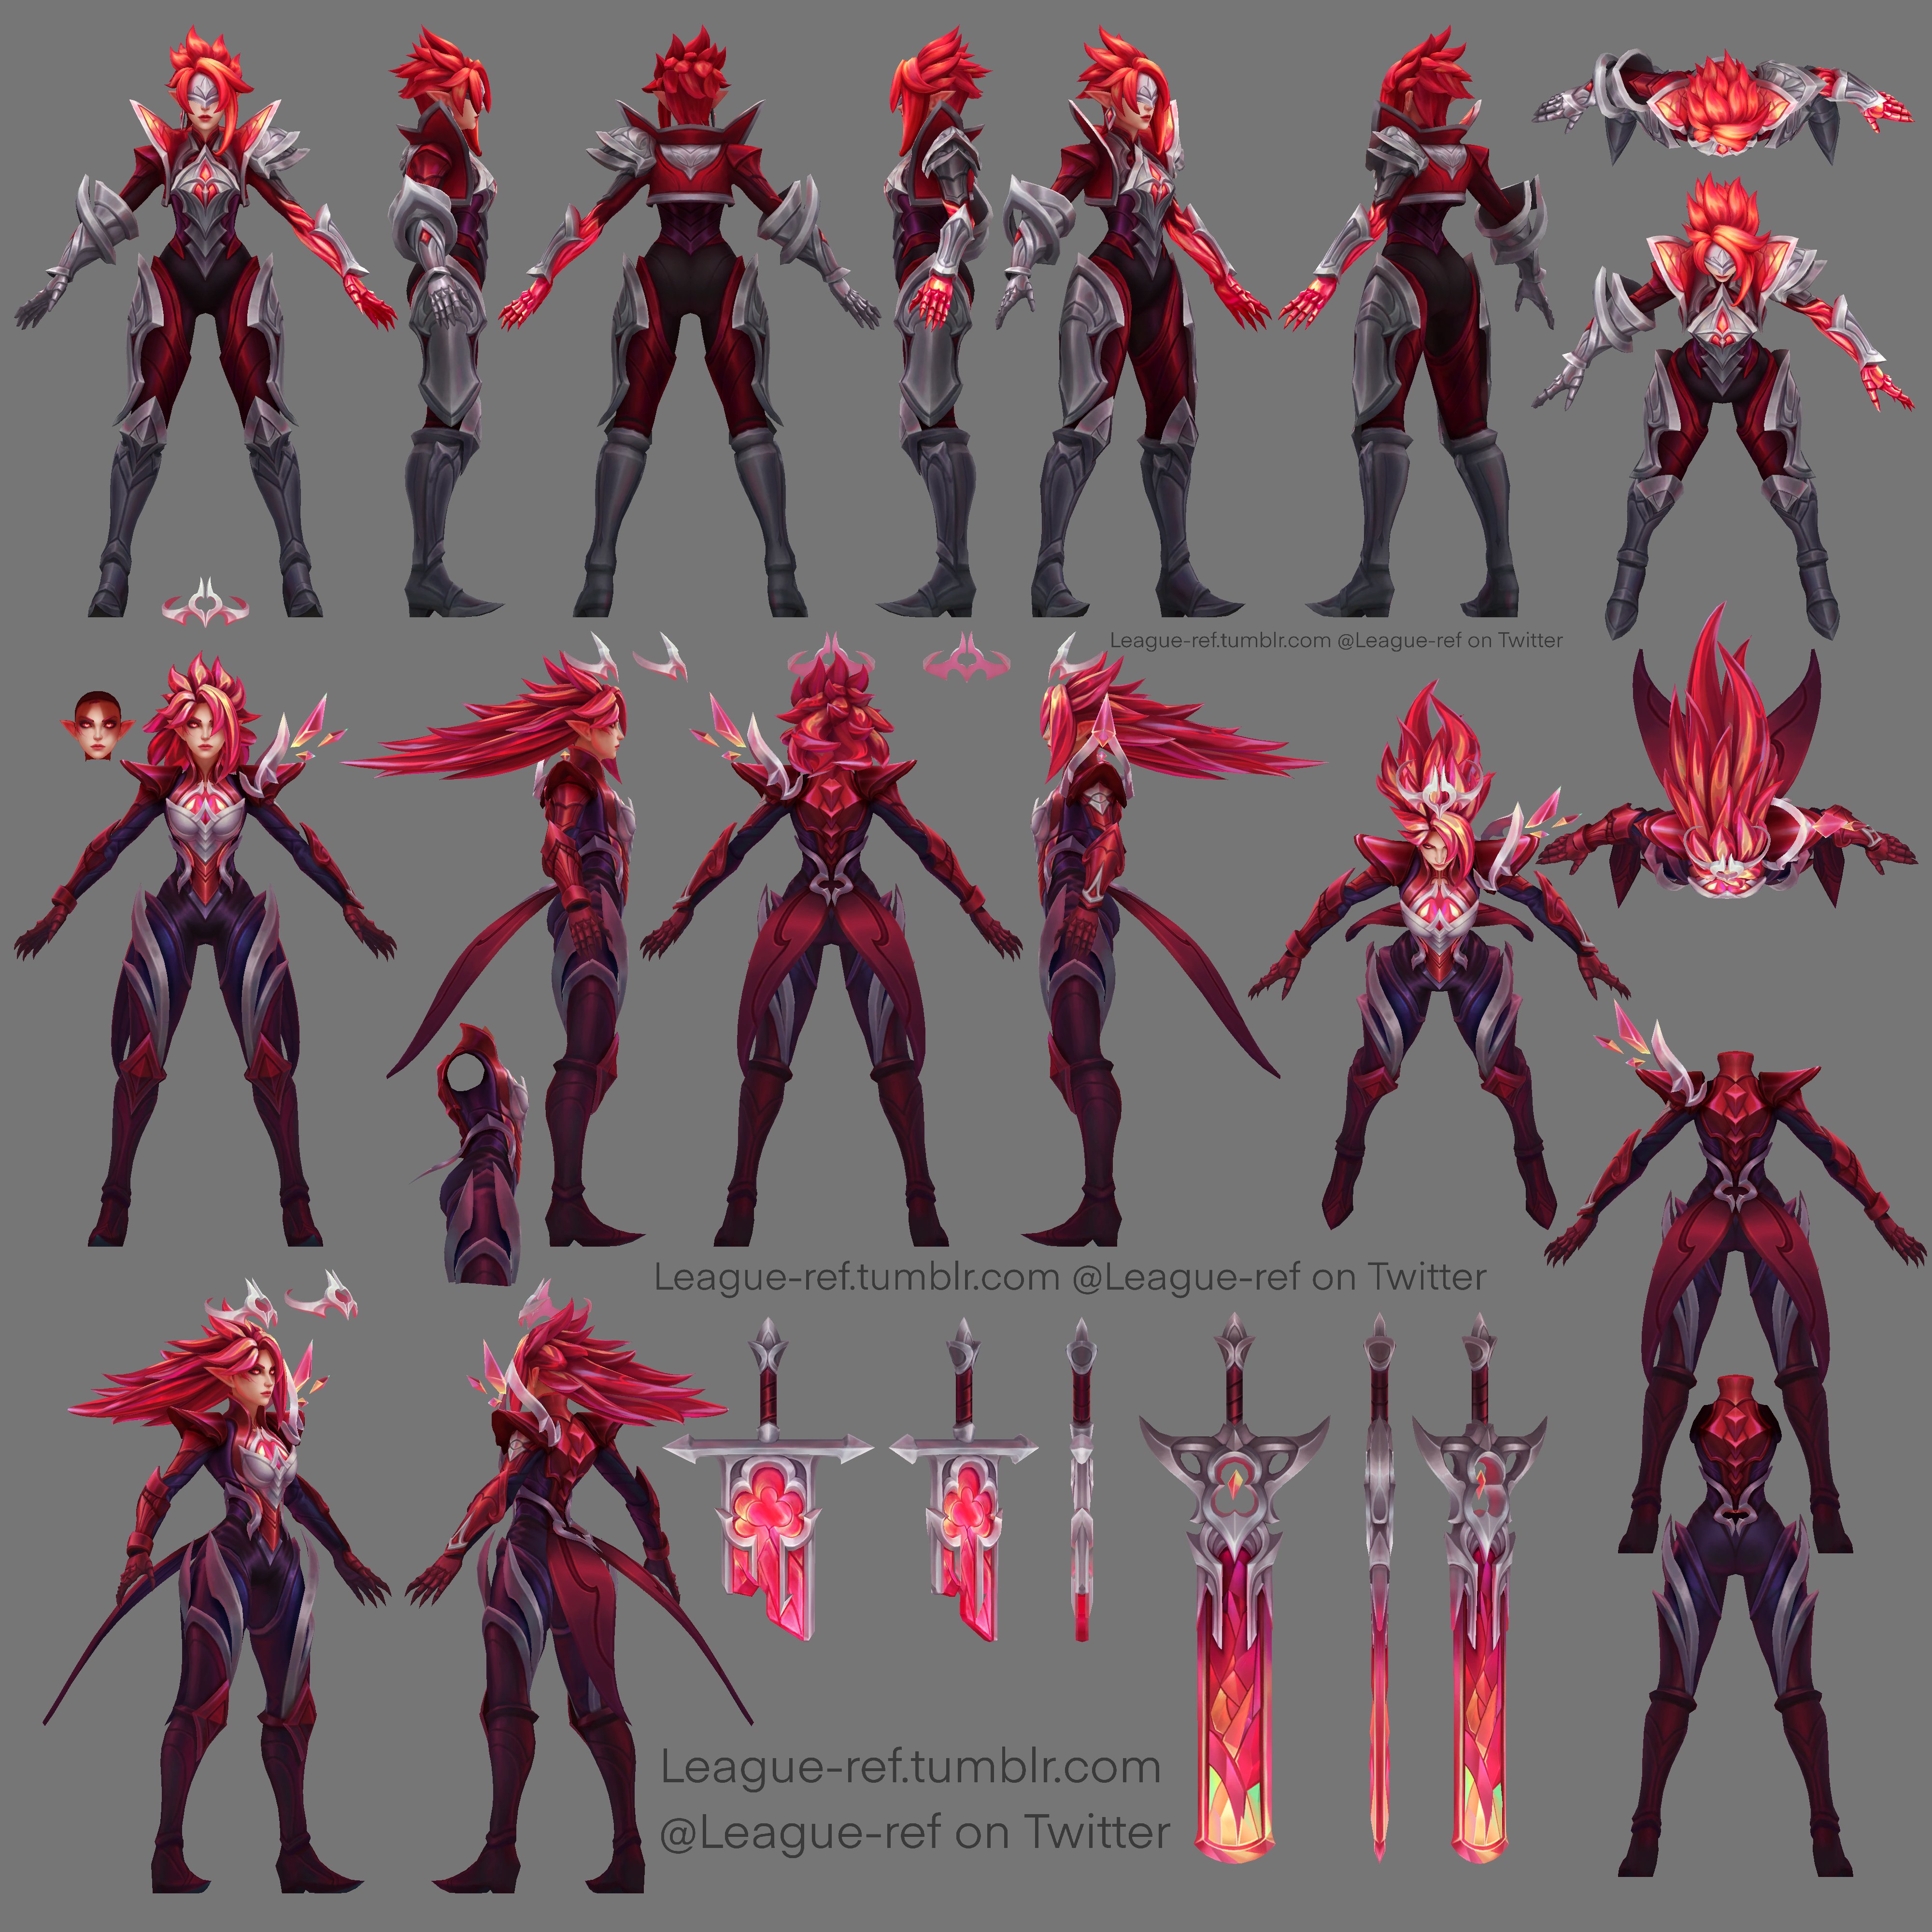 Broken Covenant Tharouu on Twitter  Champions league of legends, League of  legends characters, Lol league of legends